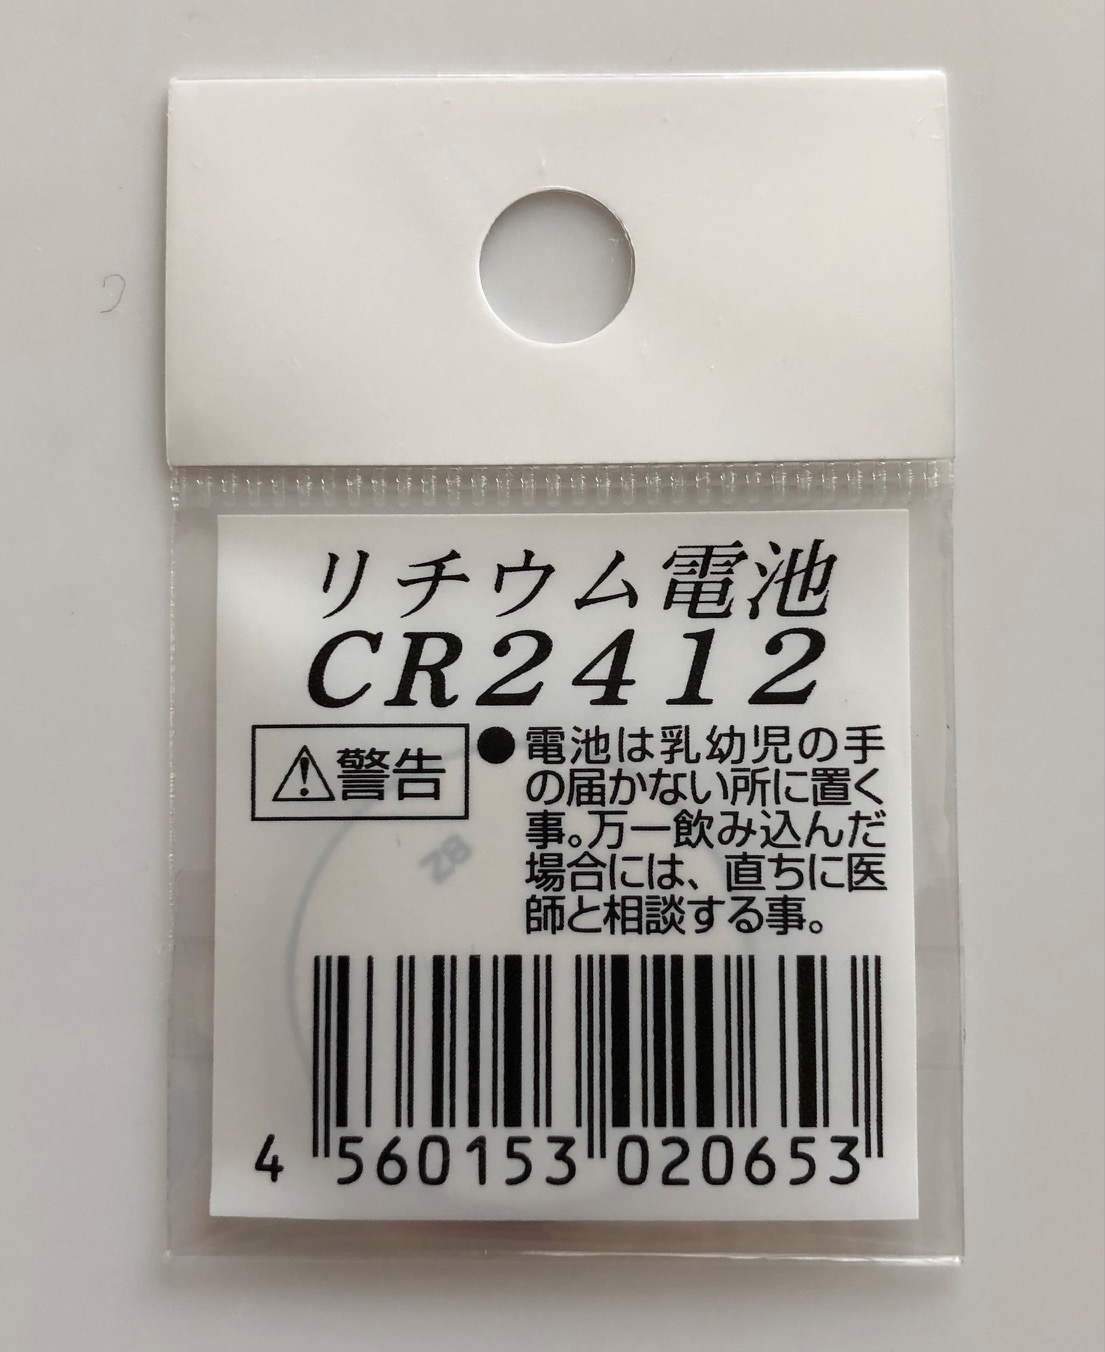  free shipping Panasonic made CR2412 lithium button battery * Lexus * Crown * Majesta and so on *